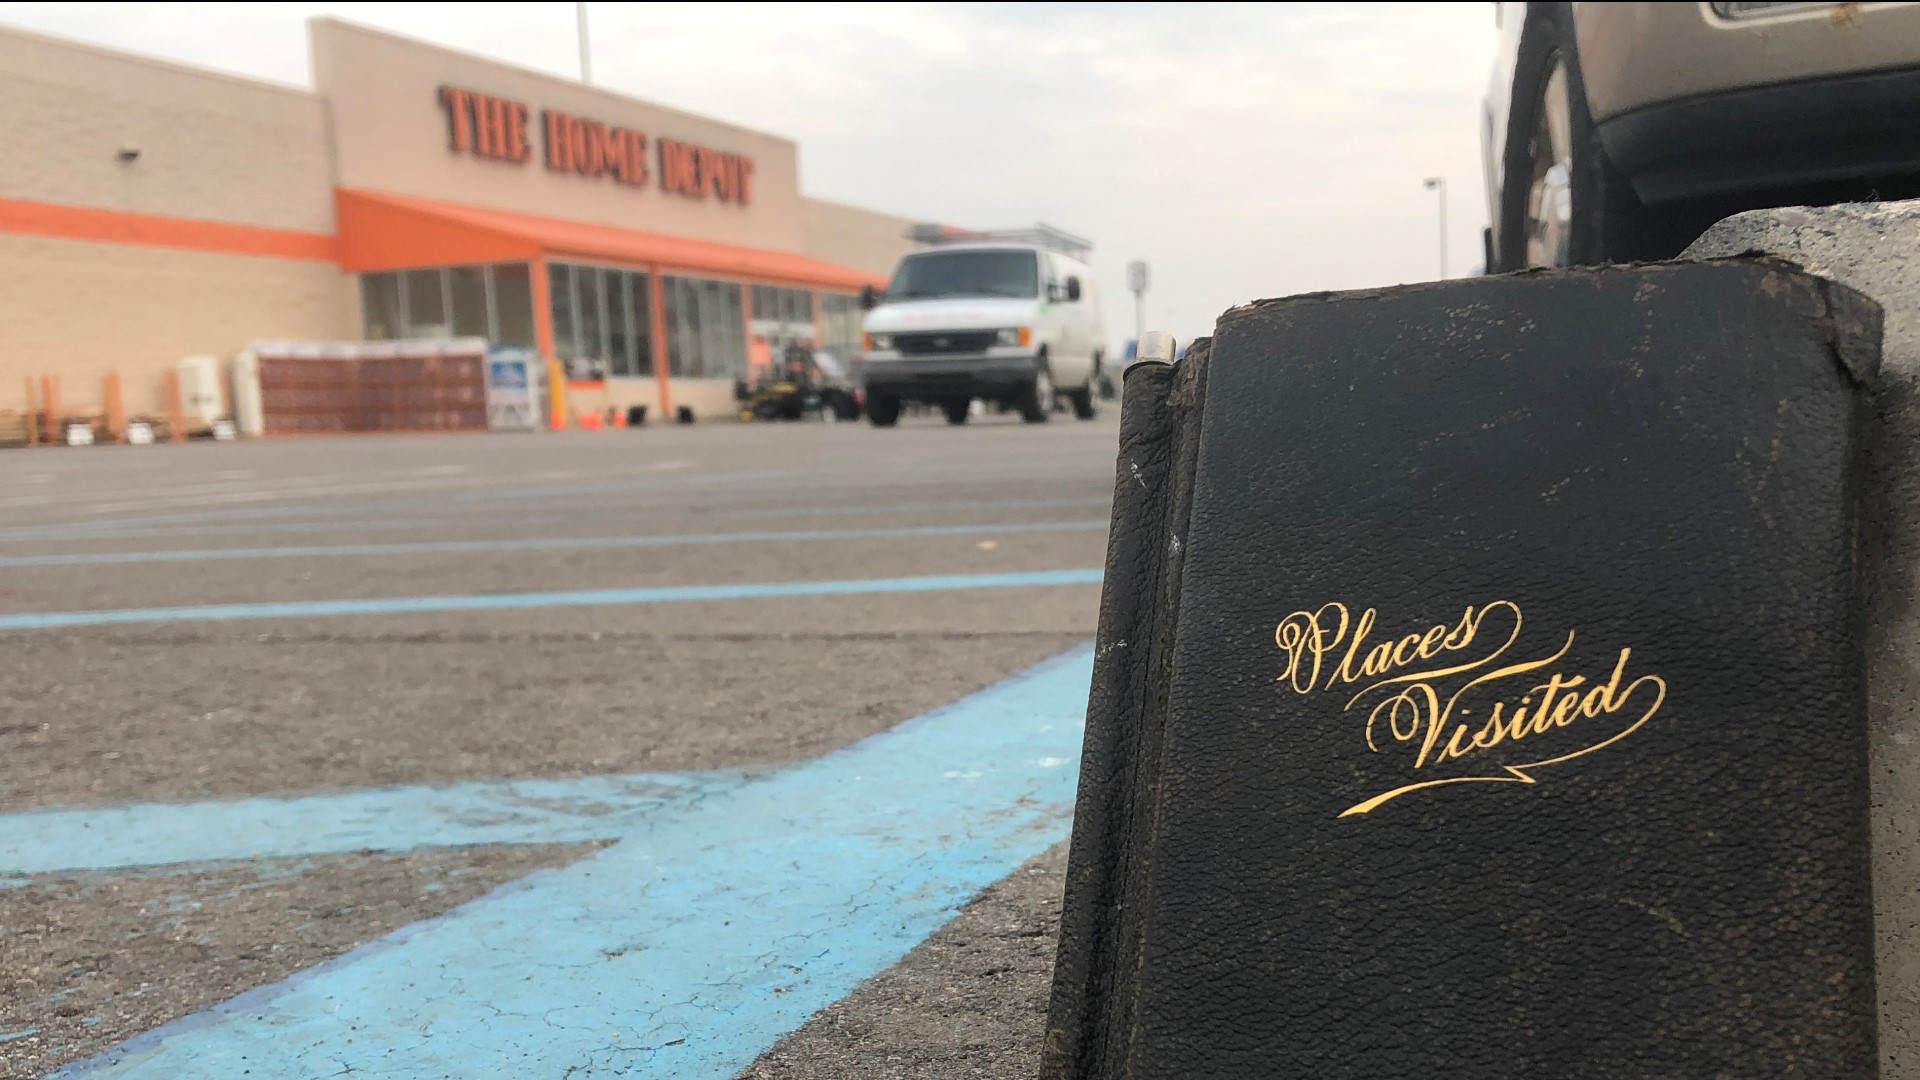 On Wednesday, Dec. 9, a customer in the parking lot at the Home Depot store in Plainwell, Mich.,  found a diary that holds information dating back to 1908.